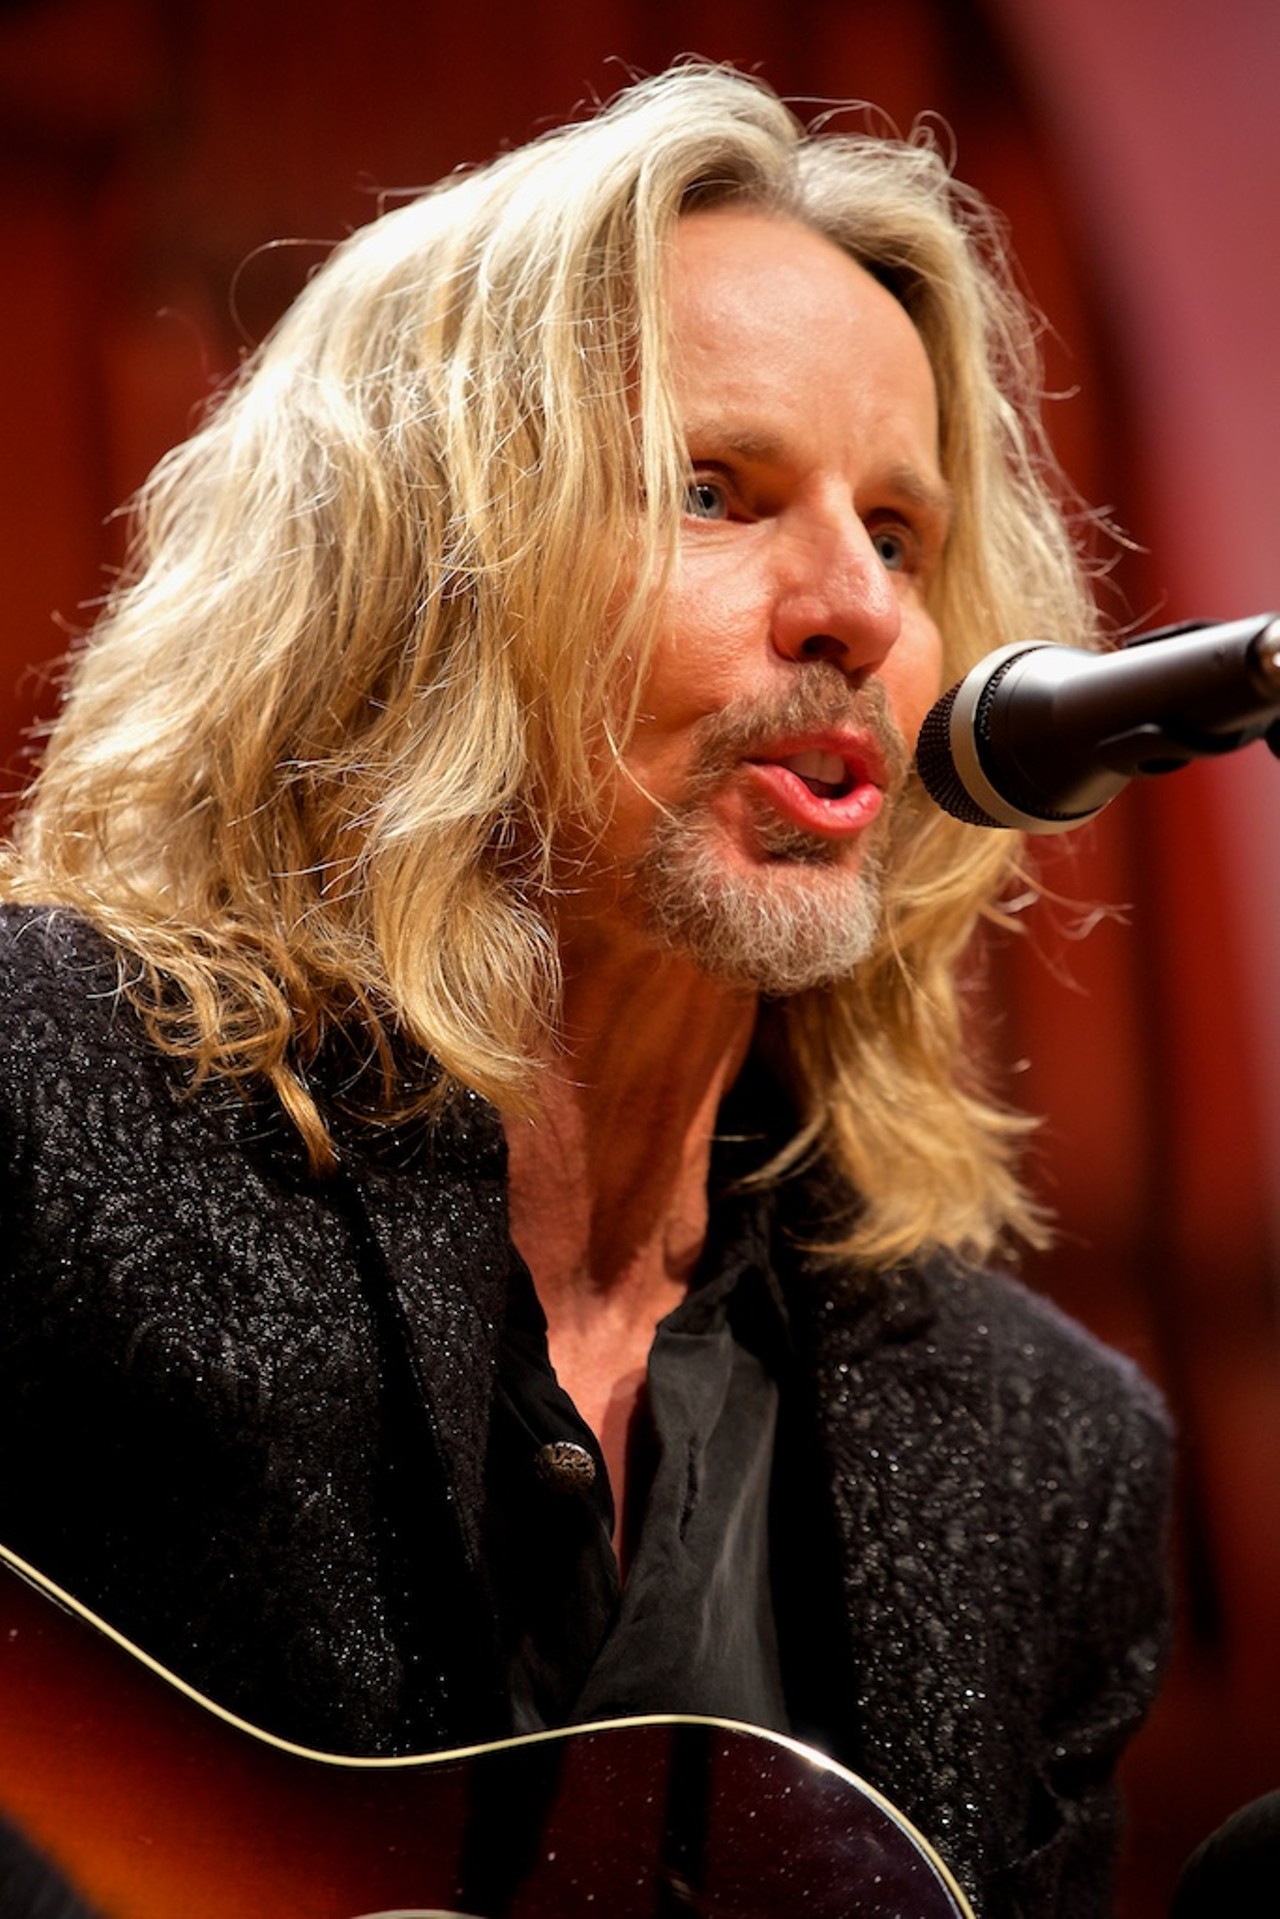 Tommy Shaw of Styx Performing with the Contemporary Youth Orchestra